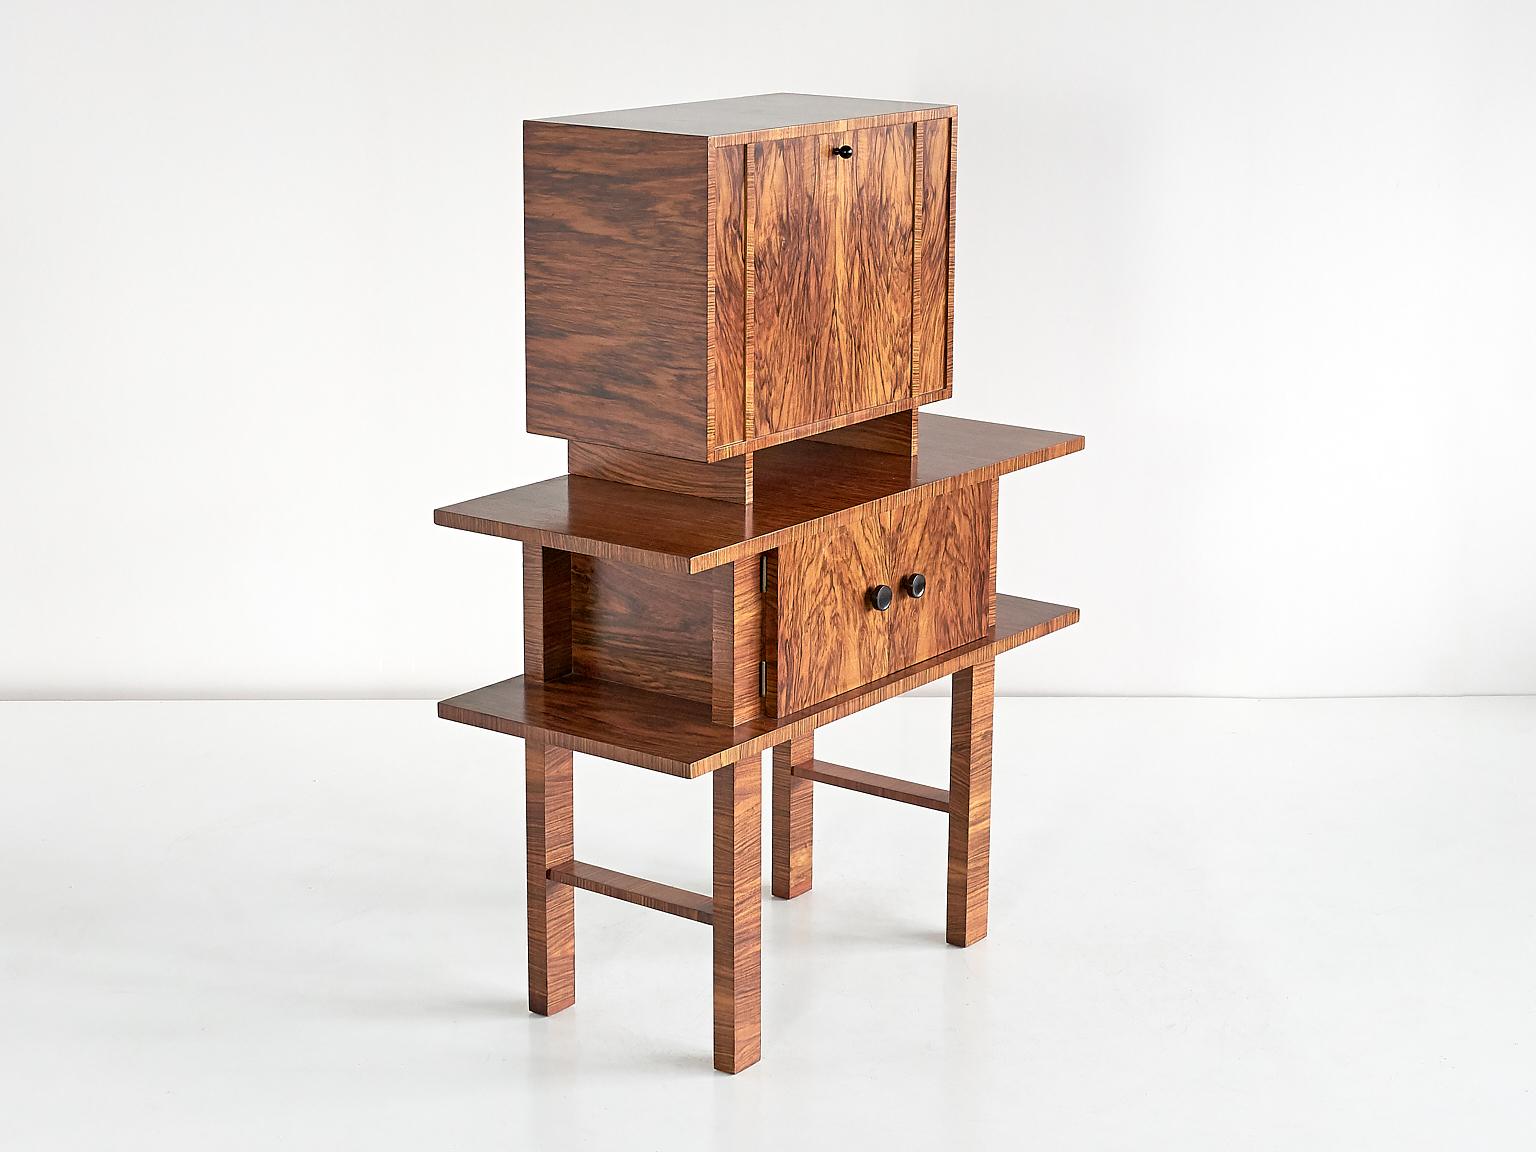 20th Century German Art Deco Bar Cabinet in Bolivian Rosewood and Birch